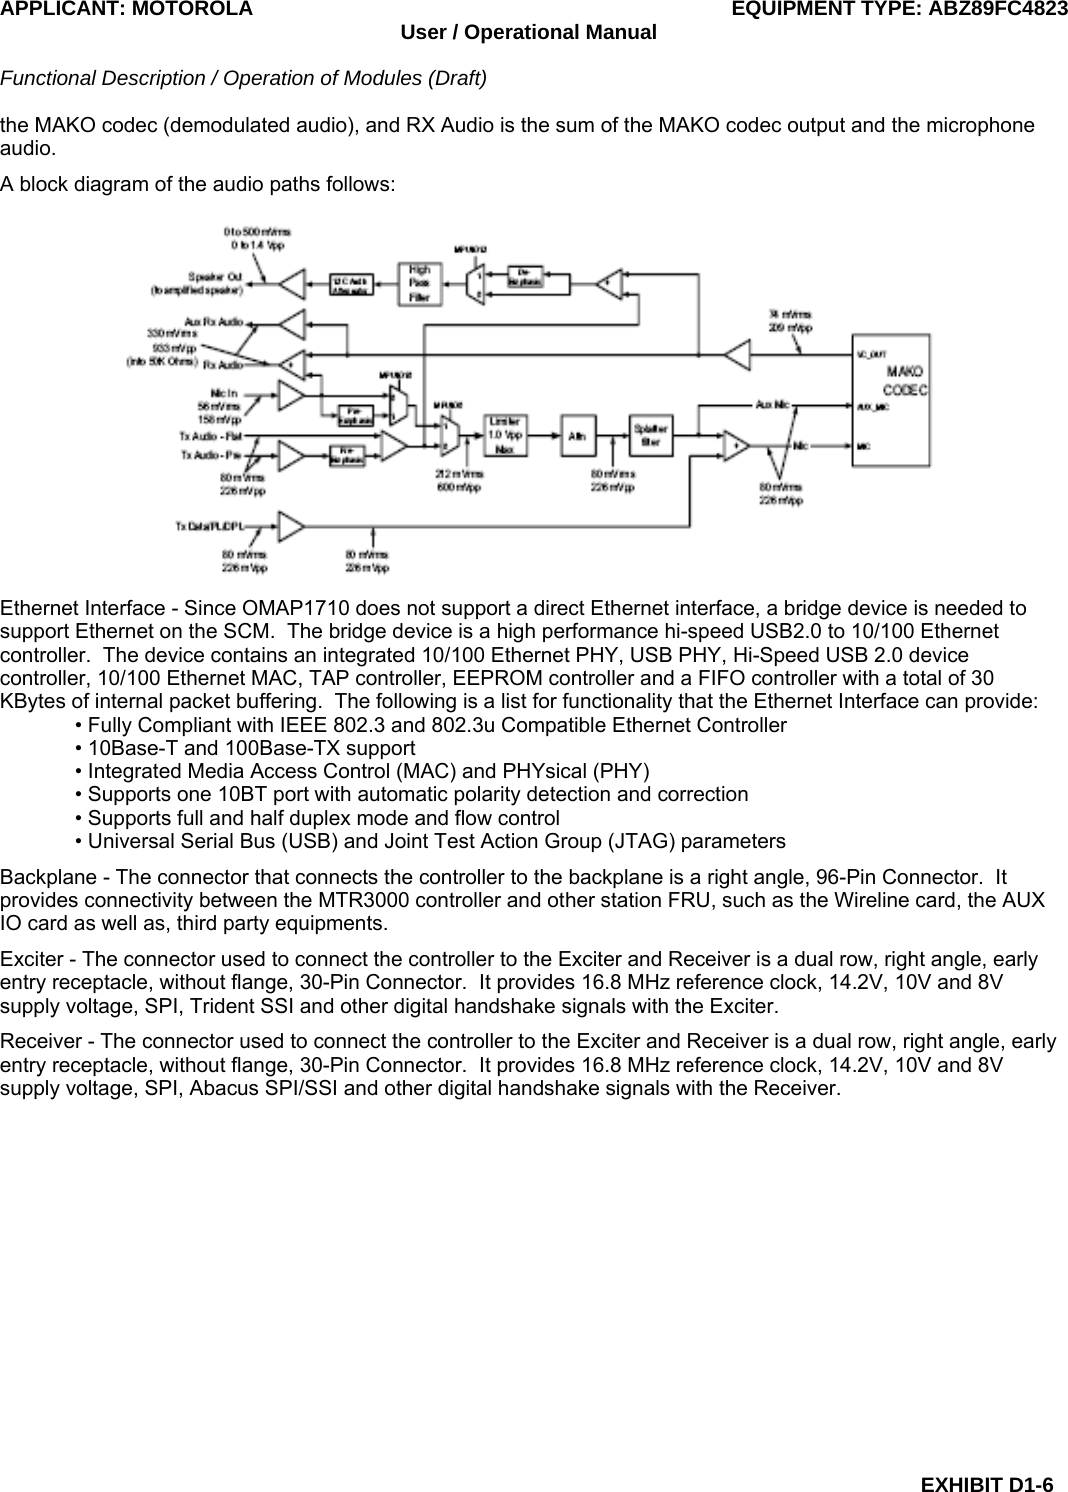 APPLICANT: MOTOROLA  EQUIPMENT TYPE: ABZ89FC4823 User / Operational Manual  Functional Description / Operation of Modules (Draft)  EXHIBIT D1-6 the MAKO codec (demodulated audio), and RX Audio is the sum of the MAKO codec output and the microphone audio. A block diagram of the audio paths follows:  Ethernet Interface - Since OMAP1710 does not support a direct Ethernet interface, a bridge device is needed to support Ethernet on the SCM.  The bridge device is a high performance hi-speed USB2.0 to 10/100 Ethernet controller.  The device contains an integrated 10/100 Ethernet PHY, USB PHY, Hi-Speed USB 2.0 device controller, 10/100 Ethernet MAC, TAP controller, EEPROM controller and a FIFO controller with a total of 30 KBytes of internal packet buffering.  The following is a list for functionality that the Ethernet Interface can provide: • Fully Compliant with IEEE 802.3 and 802.3u Compatible Ethernet Controller • 10Base-T and 100Base-TX support • Integrated Media Access Control (MAC) and PHYsical (PHY) • Supports one 10BT port with automatic polarity detection and correction • Supports full and half duplex mode and flow control • Universal Serial Bus (USB) and Joint Test Action Group (JTAG) parameters Backplane - The connector that connects the controller to the backplane is a right angle, 96-Pin Connector.  It provides connectivity between the MTR3000 controller and other station FRU, such as the Wireline card, the AUX IO card as well as, third party equipments. Exciter - The connector used to connect the controller to the Exciter and Receiver is a dual row, right angle, early entry receptacle, without flange, 30-Pin Connector.  It provides 16.8 MHz reference clock, 14.2V, 10V and 8V supply voltage, SPI, Trident SSI and other digital handshake signals with the Exciter. Receiver - The connector used to connect the controller to the Exciter and Receiver is a dual row, right angle, early entry receptacle, without flange, 30-Pin Connector.  It provides 16.8 MHz reference clock, 14.2V, 10V and 8V supply voltage, SPI, Abacus SPI/SSI and other digital handshake signals with the Receiver.  